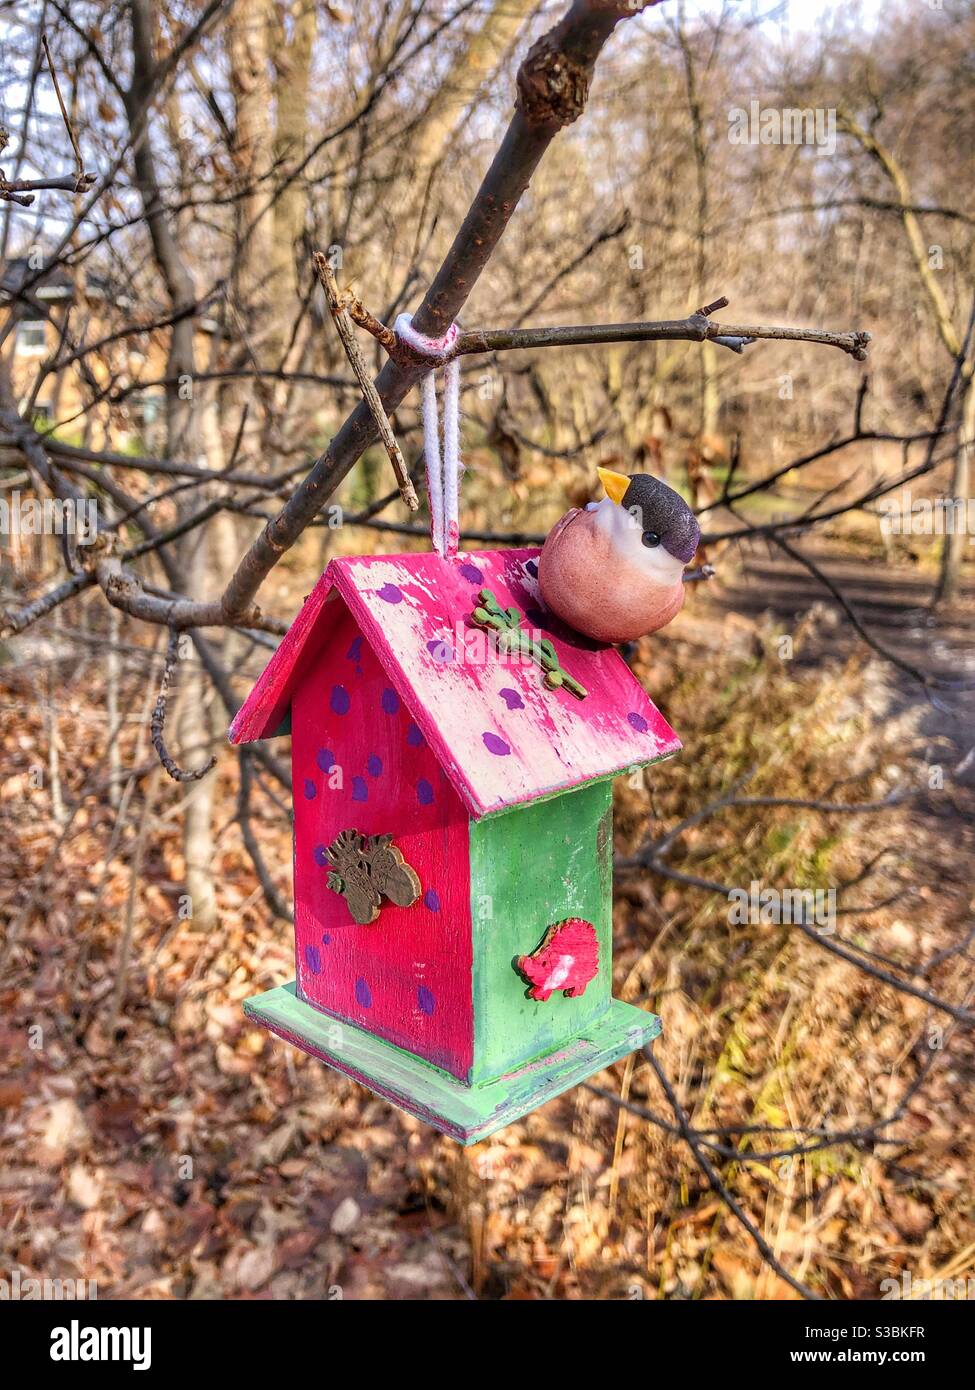 A cheerful bird feeder hanging from a branch in the woods. Stock Photo